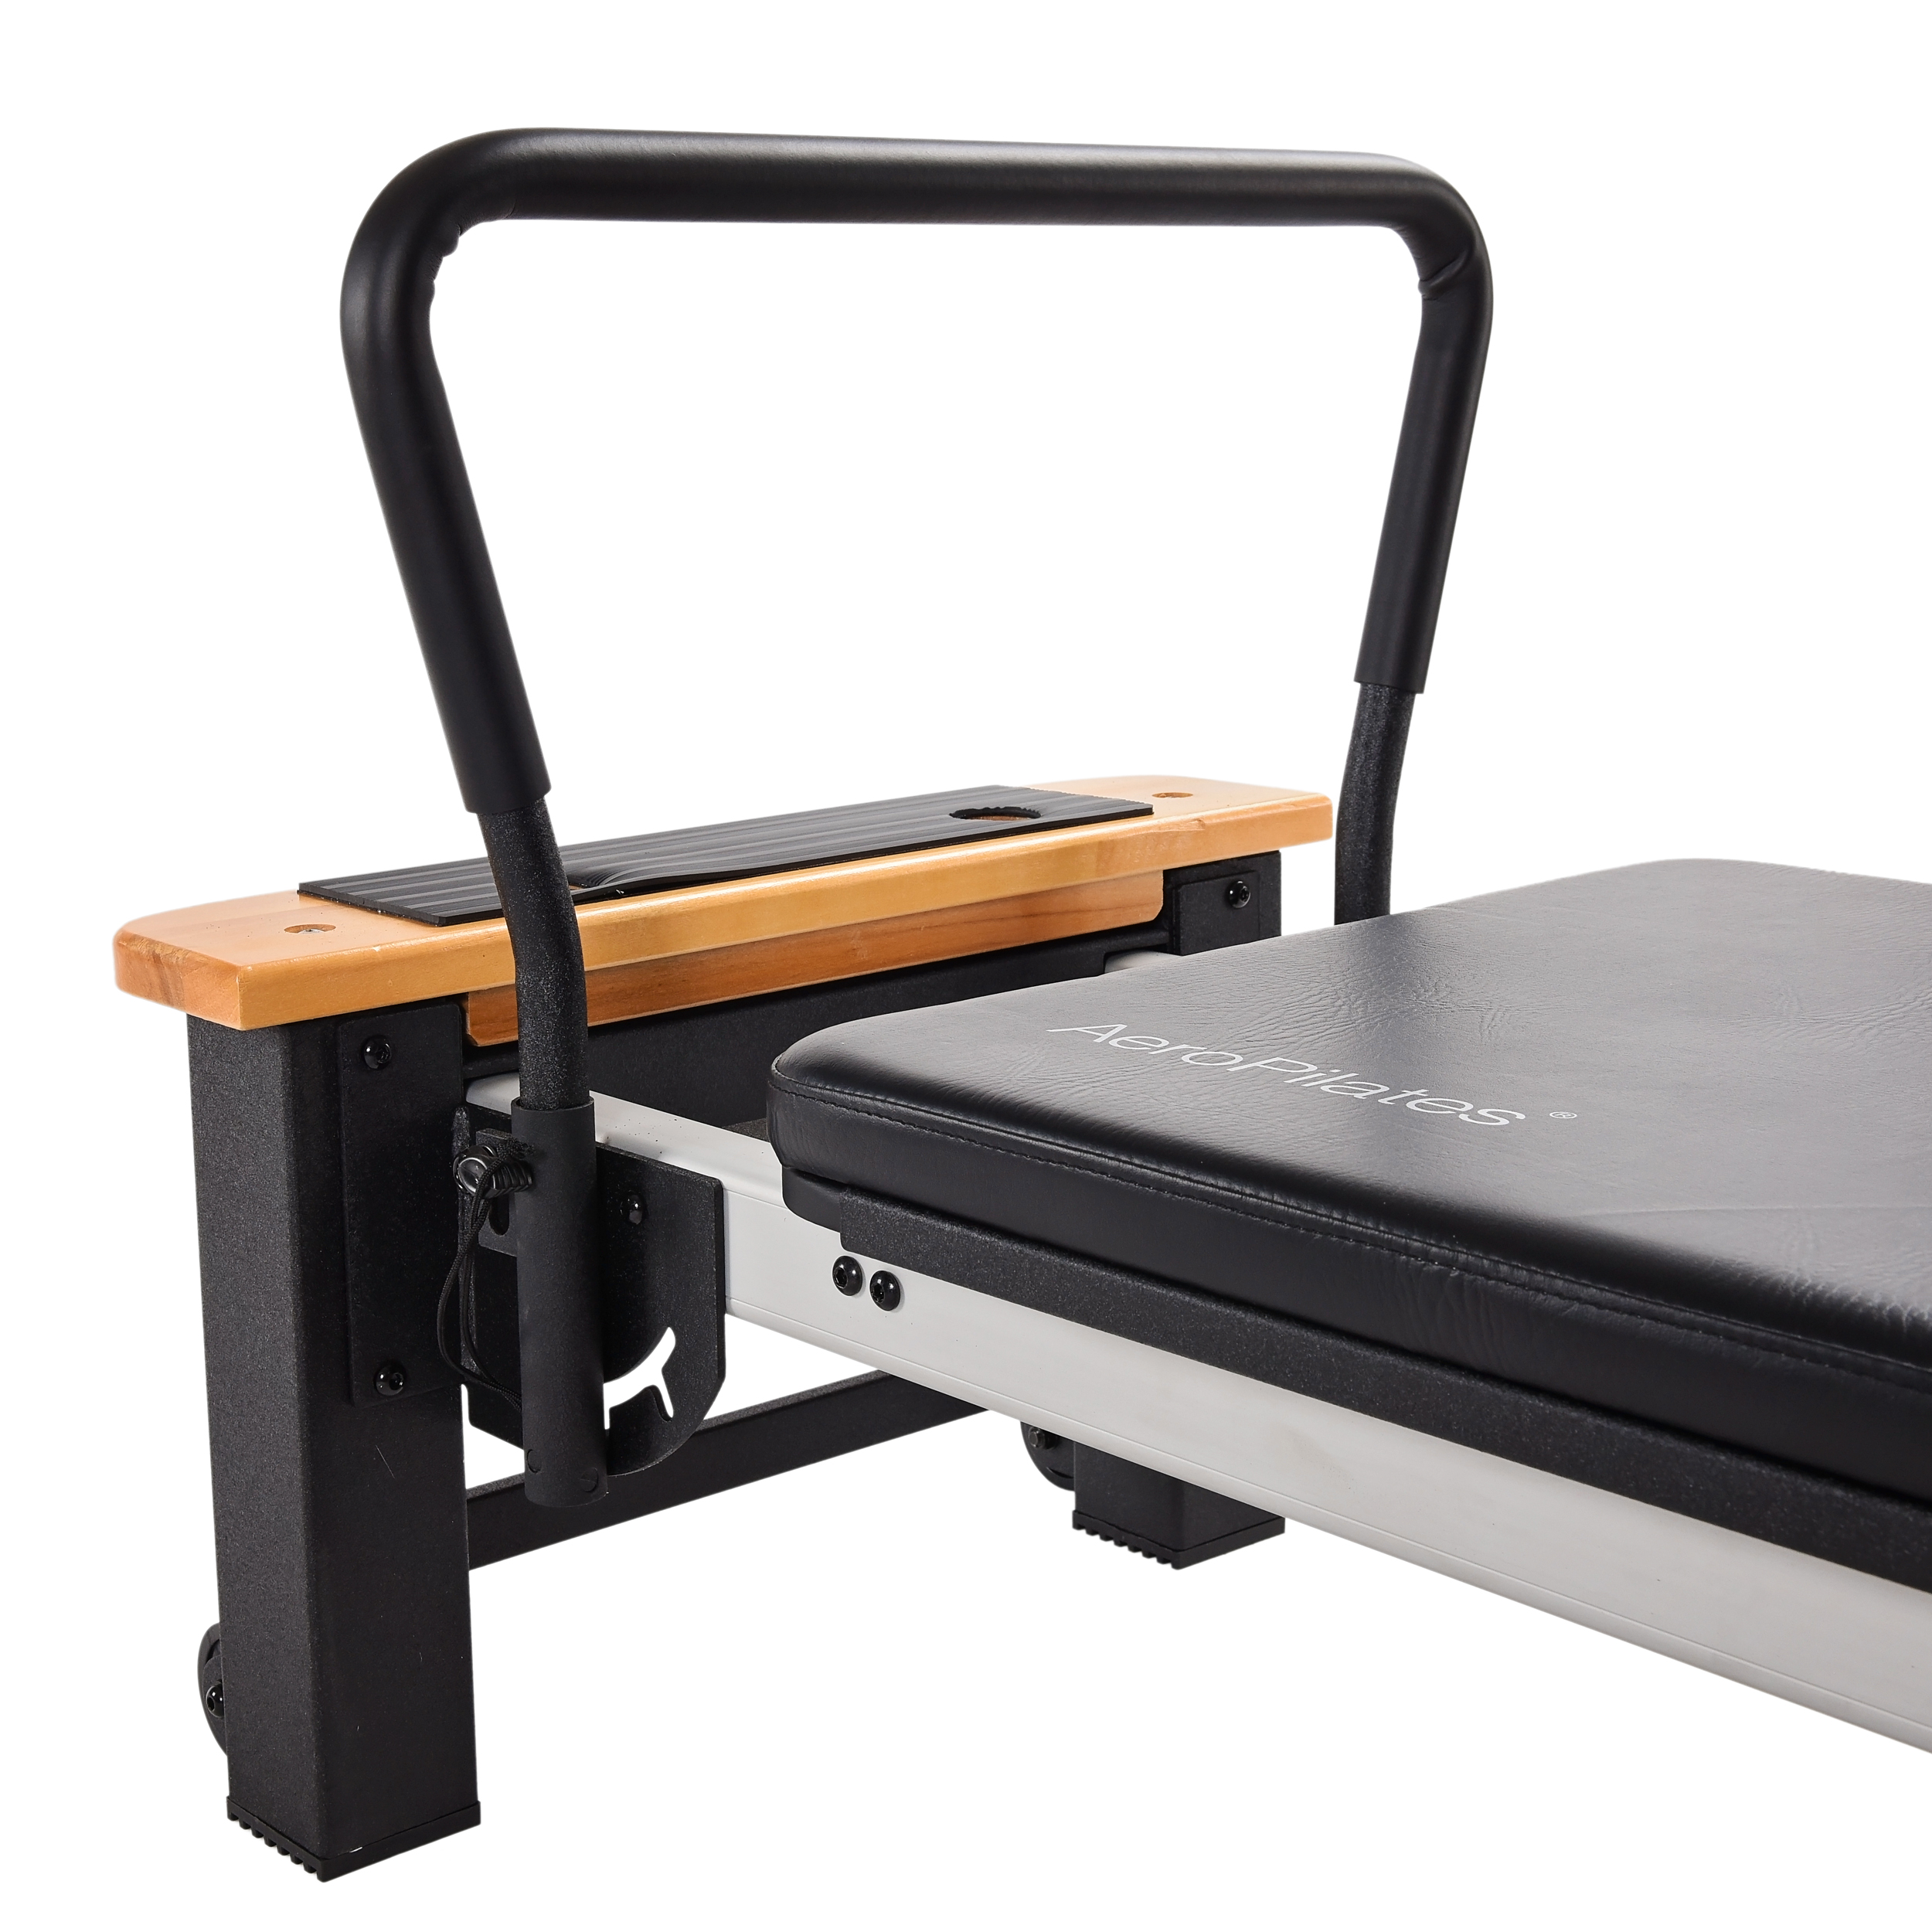 AeroPilates by Stamina 55-5110 5-Cord Pro Reformer with Rebounder and Stand  NEW for Sale in Joliet, IL - OfferUp